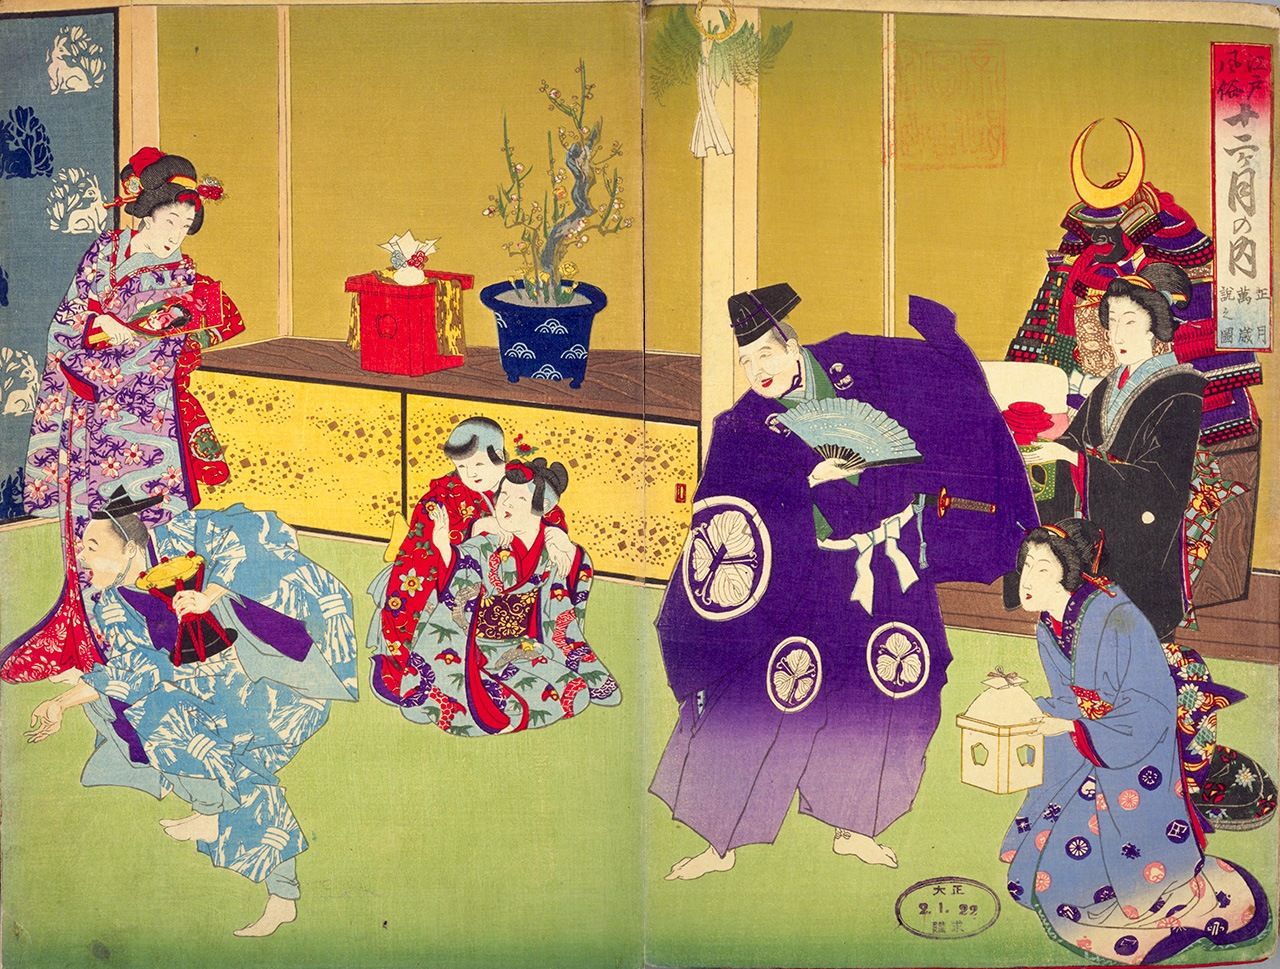 A tayū, in his distinctive triangular eboshi hat and hitatare court robes, and a drum-carrying saizō perform for a well-off family in a series of prints by Yōshū Chikanobu depicting daily life in Edo. (Courtesy National Diet Library)